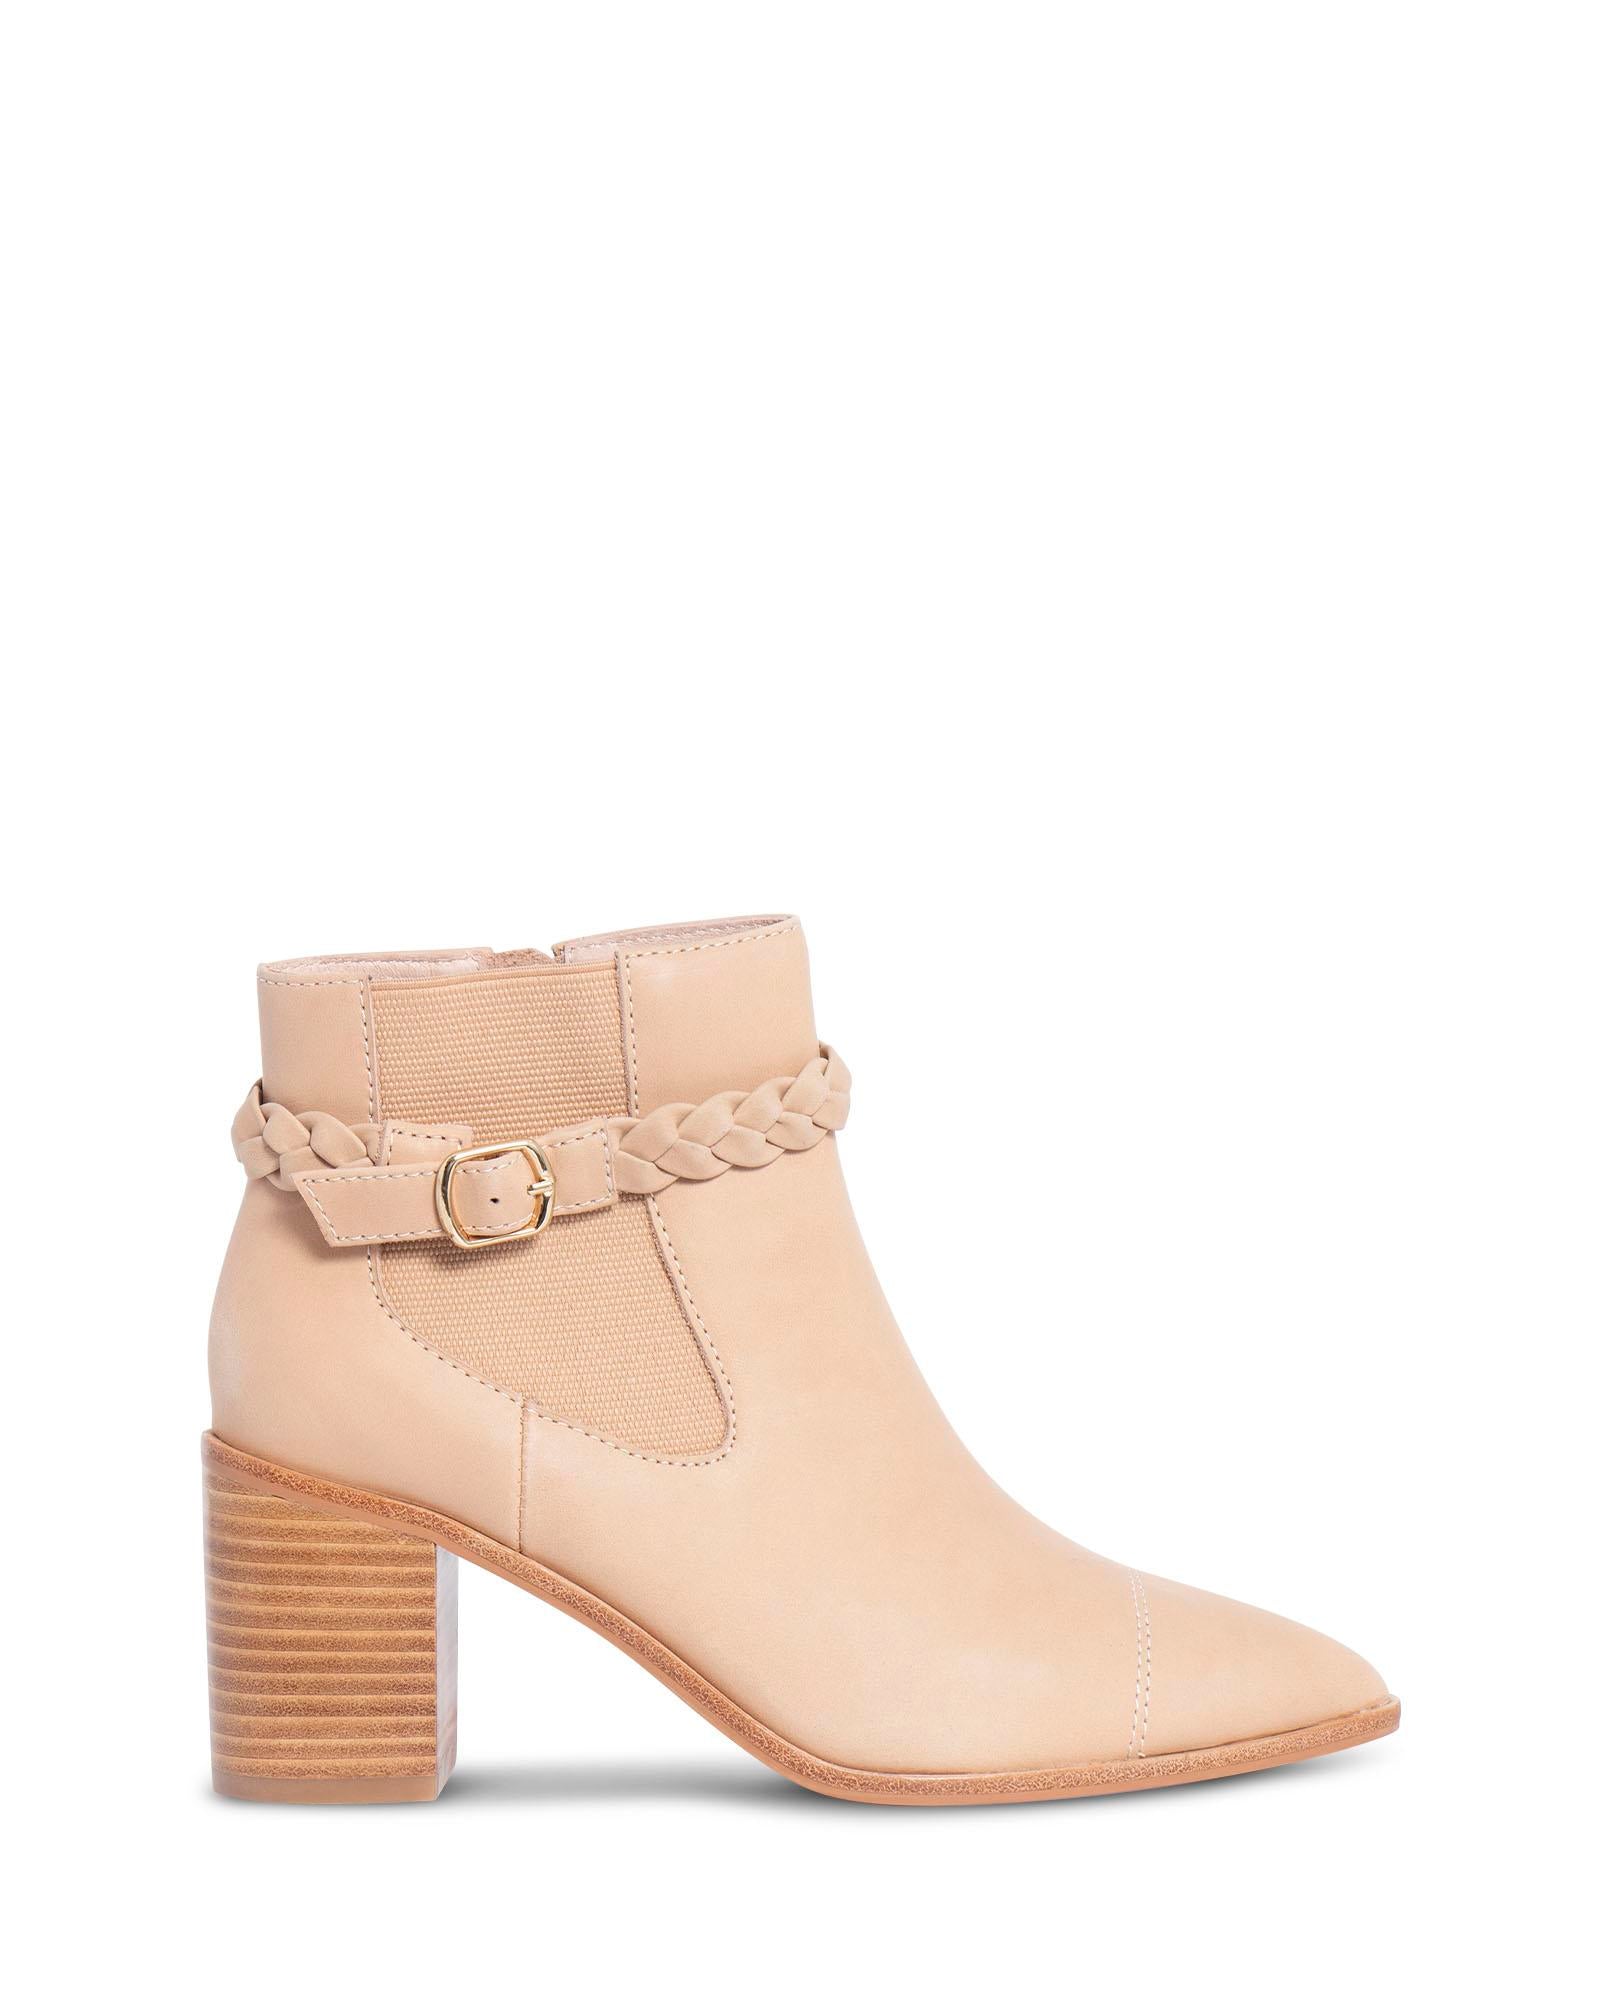 Margo Narural 7cm Heel Ankle Boot with Hand Woven Strap and Elasticated Gusset 